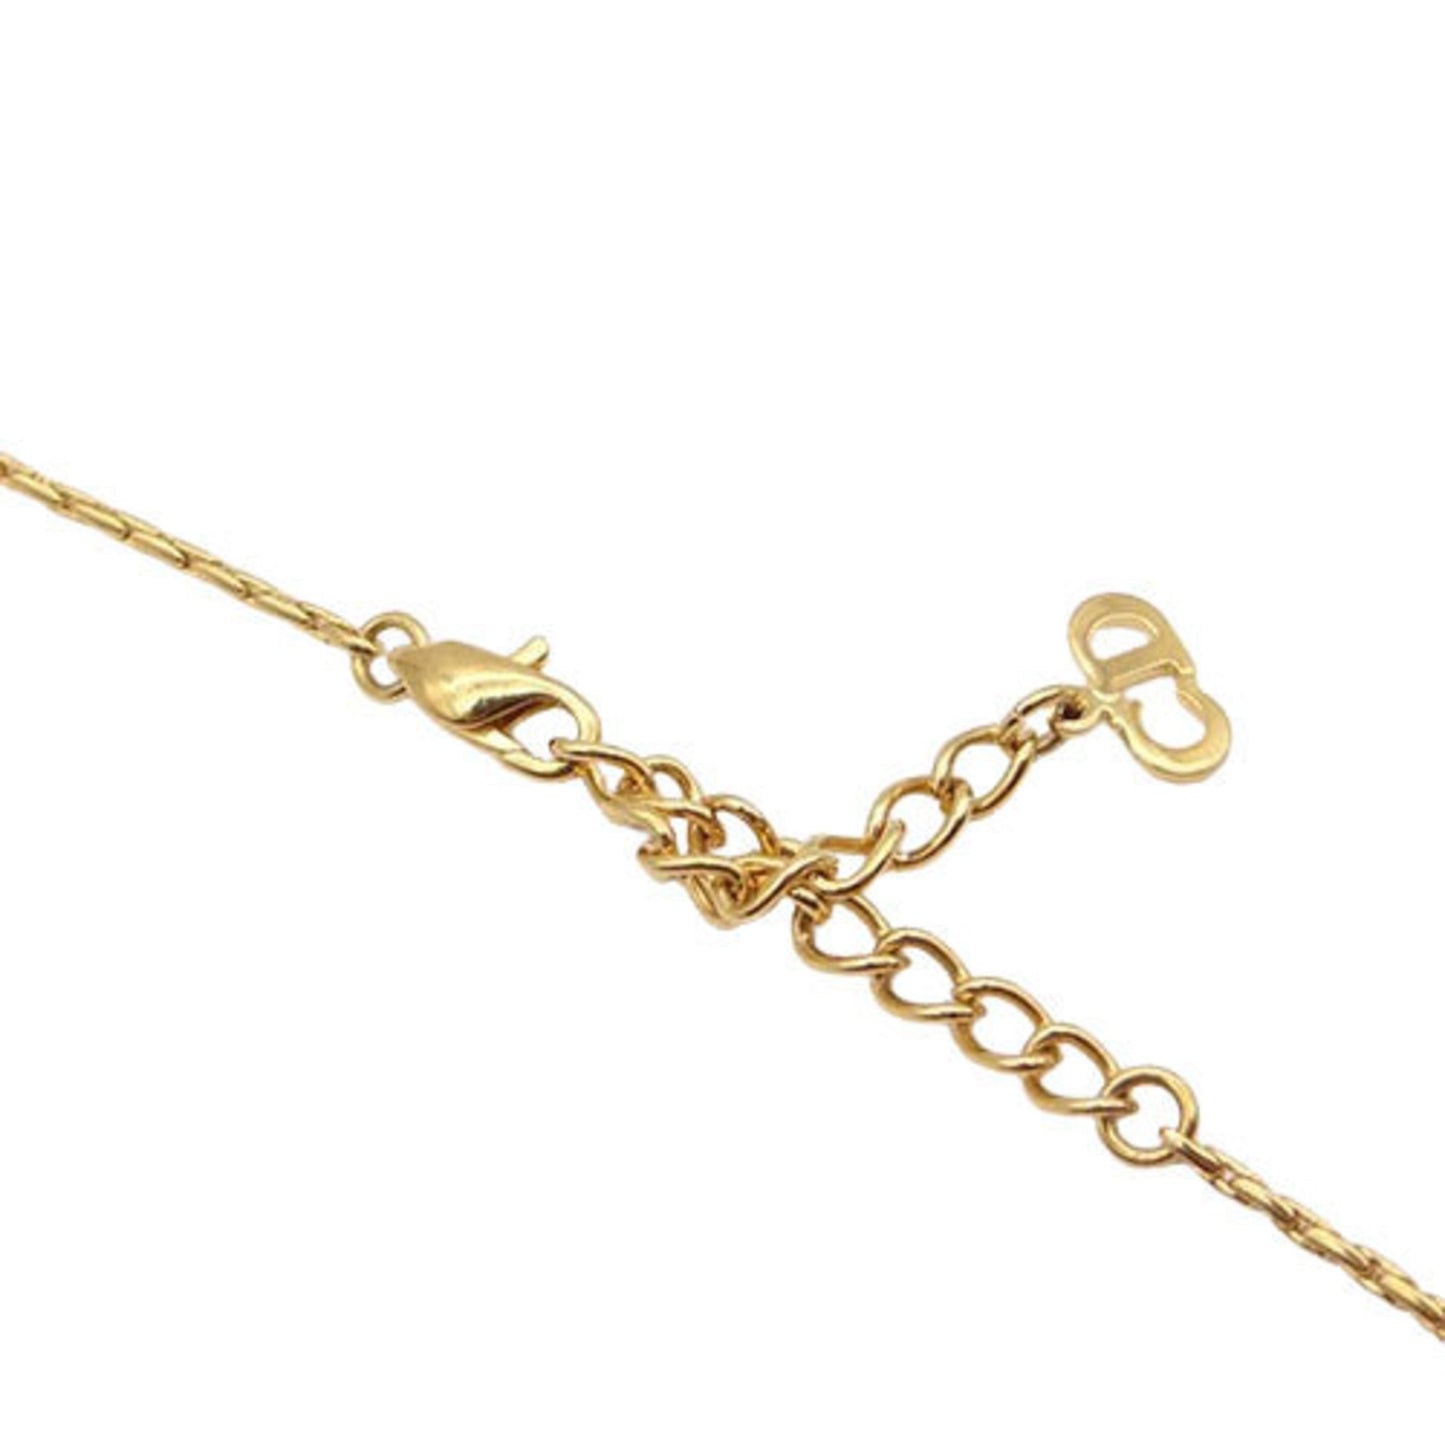 Dior Women's Gold Metal Necklace by Dior in Gold